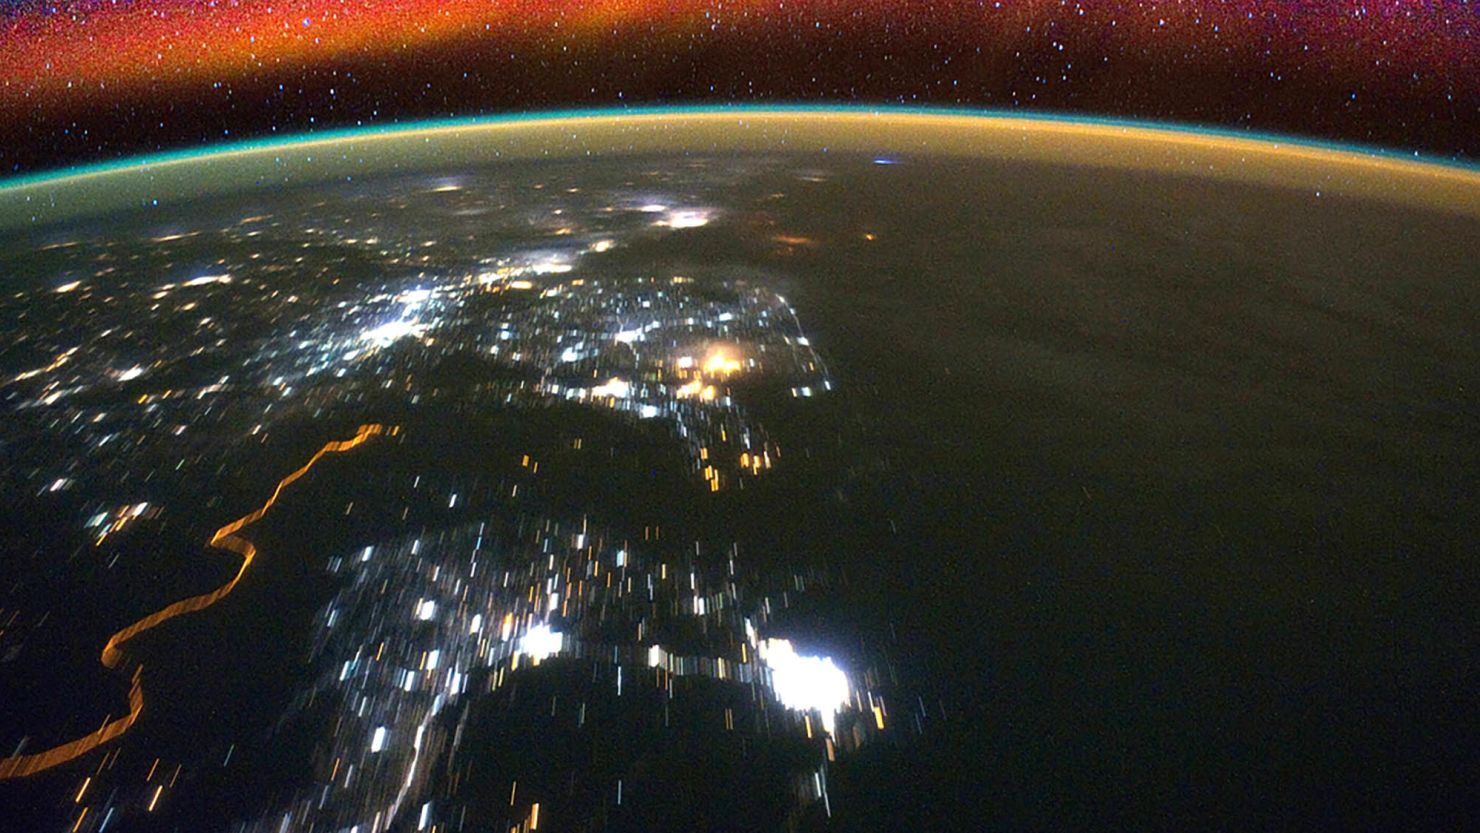 The lowest reaches of space glow with bright bands of color called airglow. NASA's new GOLD mission will research this region.